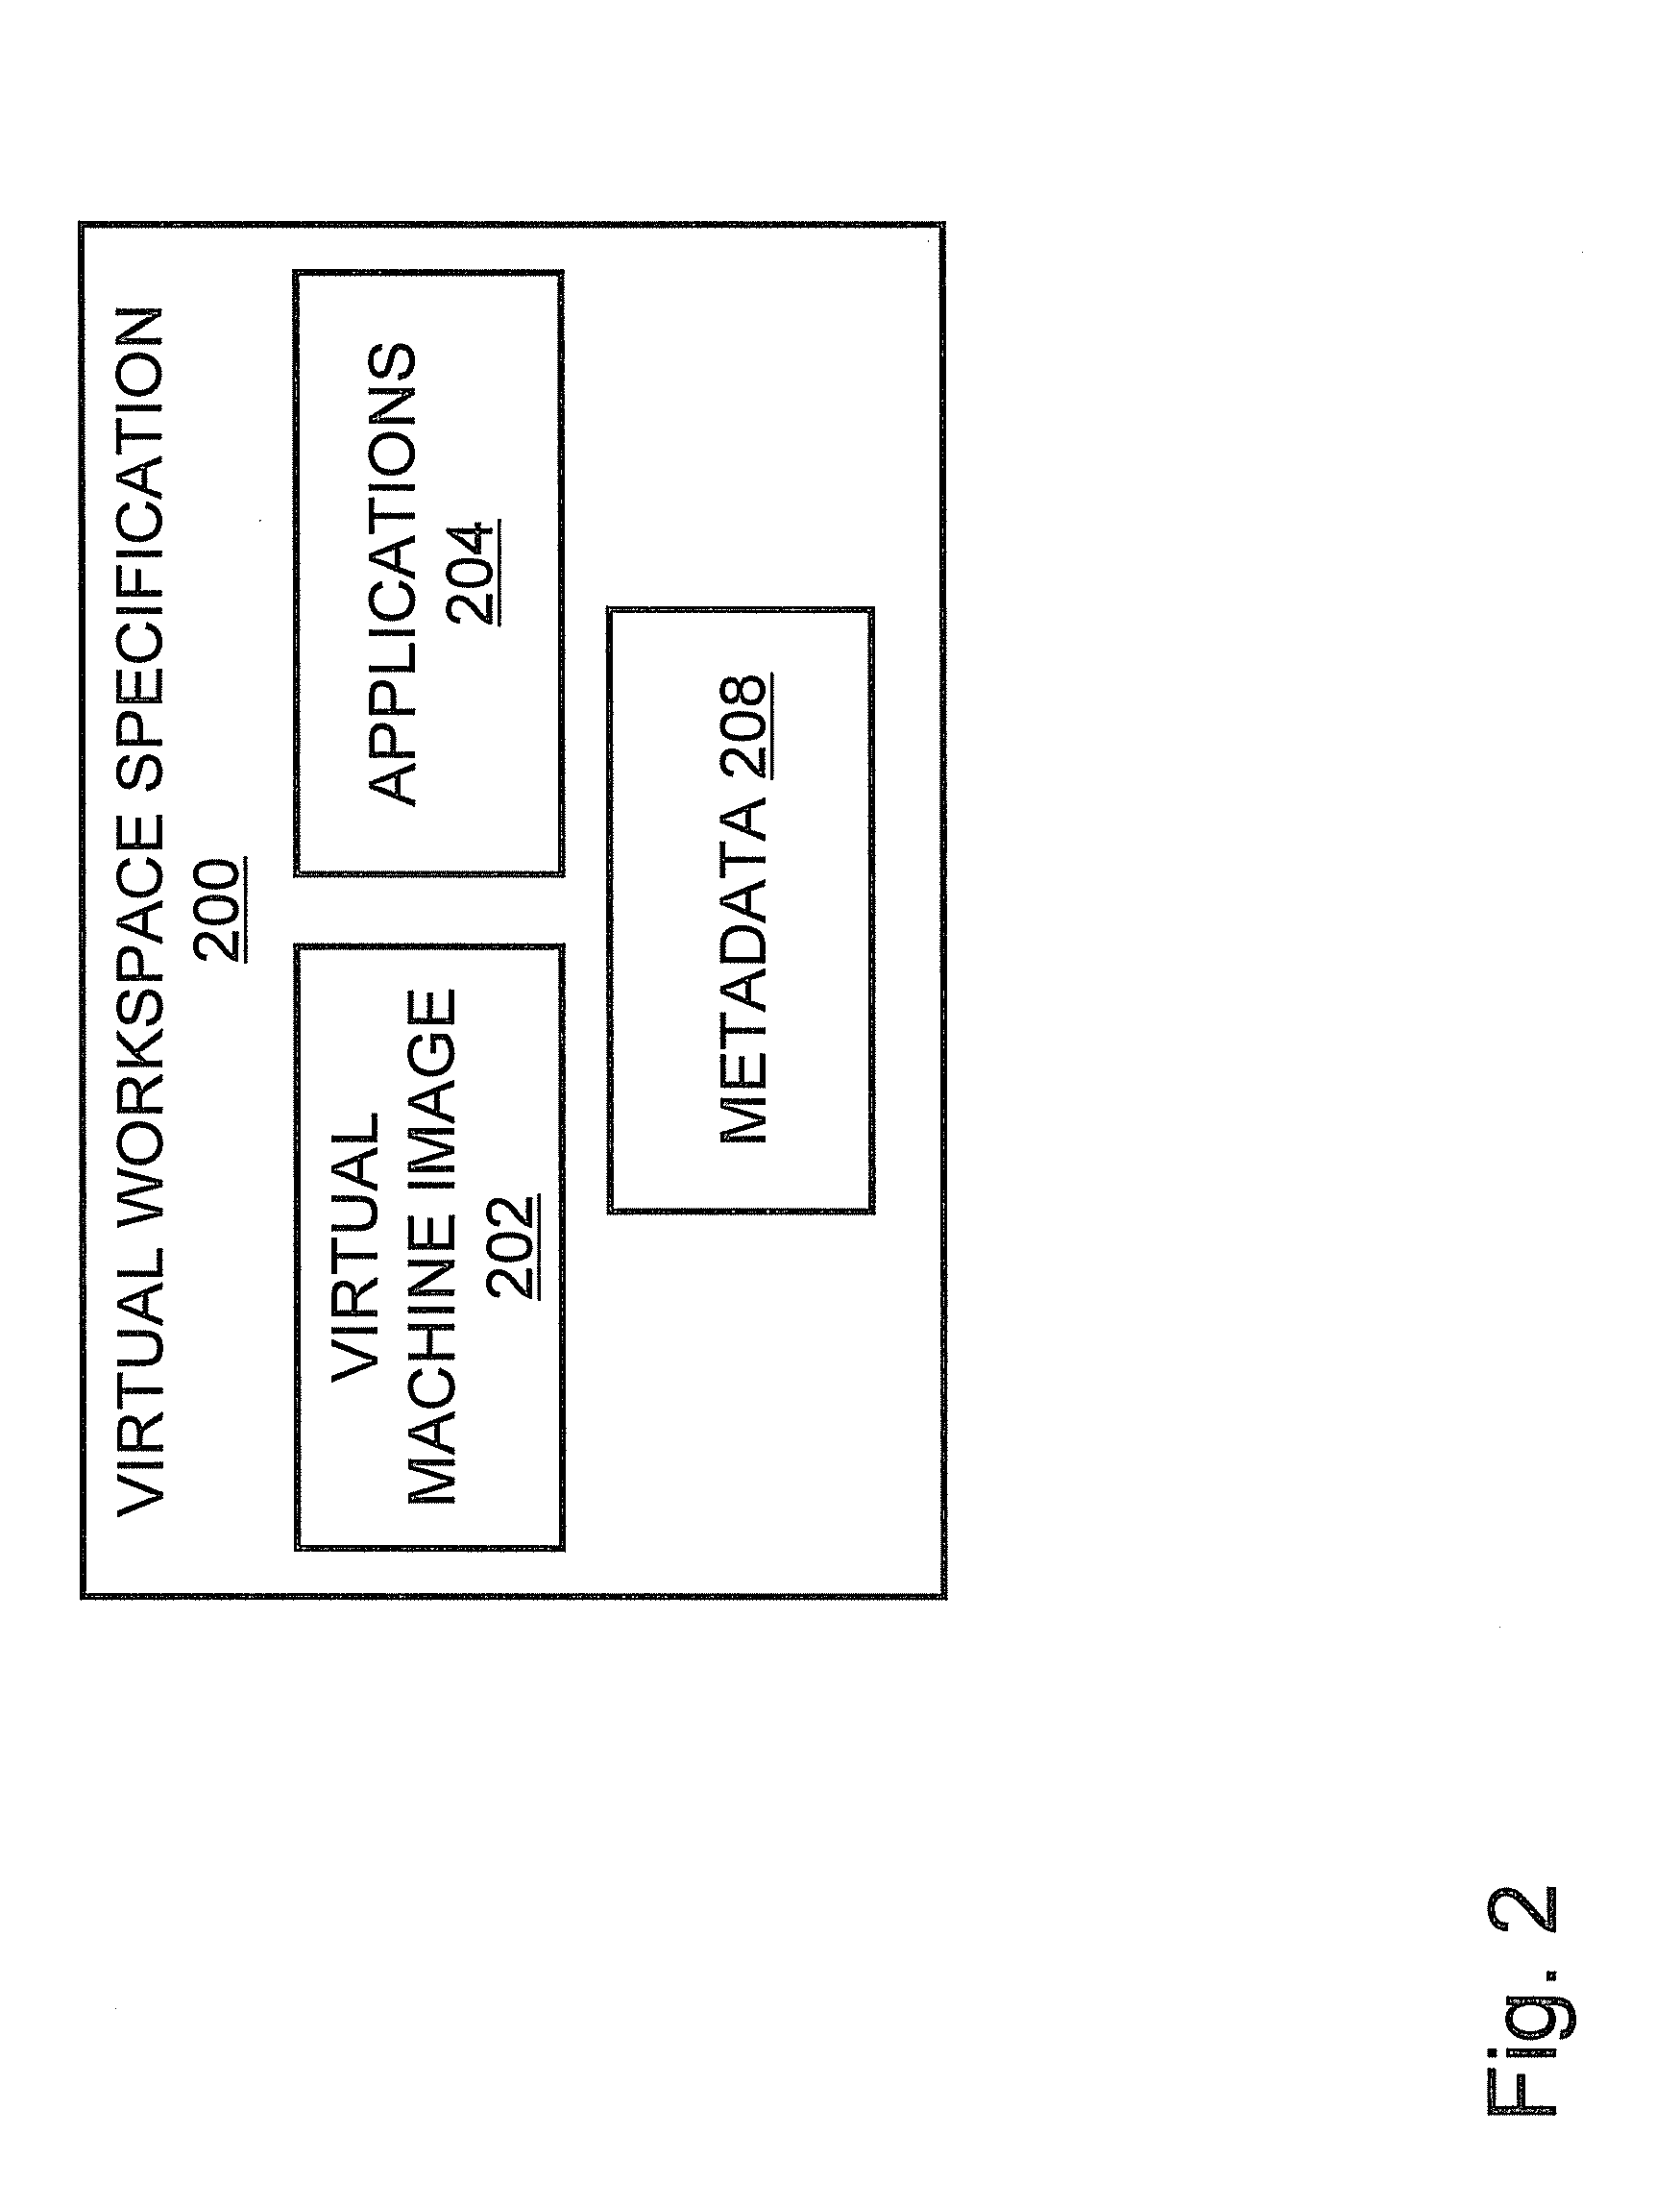 Virtual computing management systems and methods